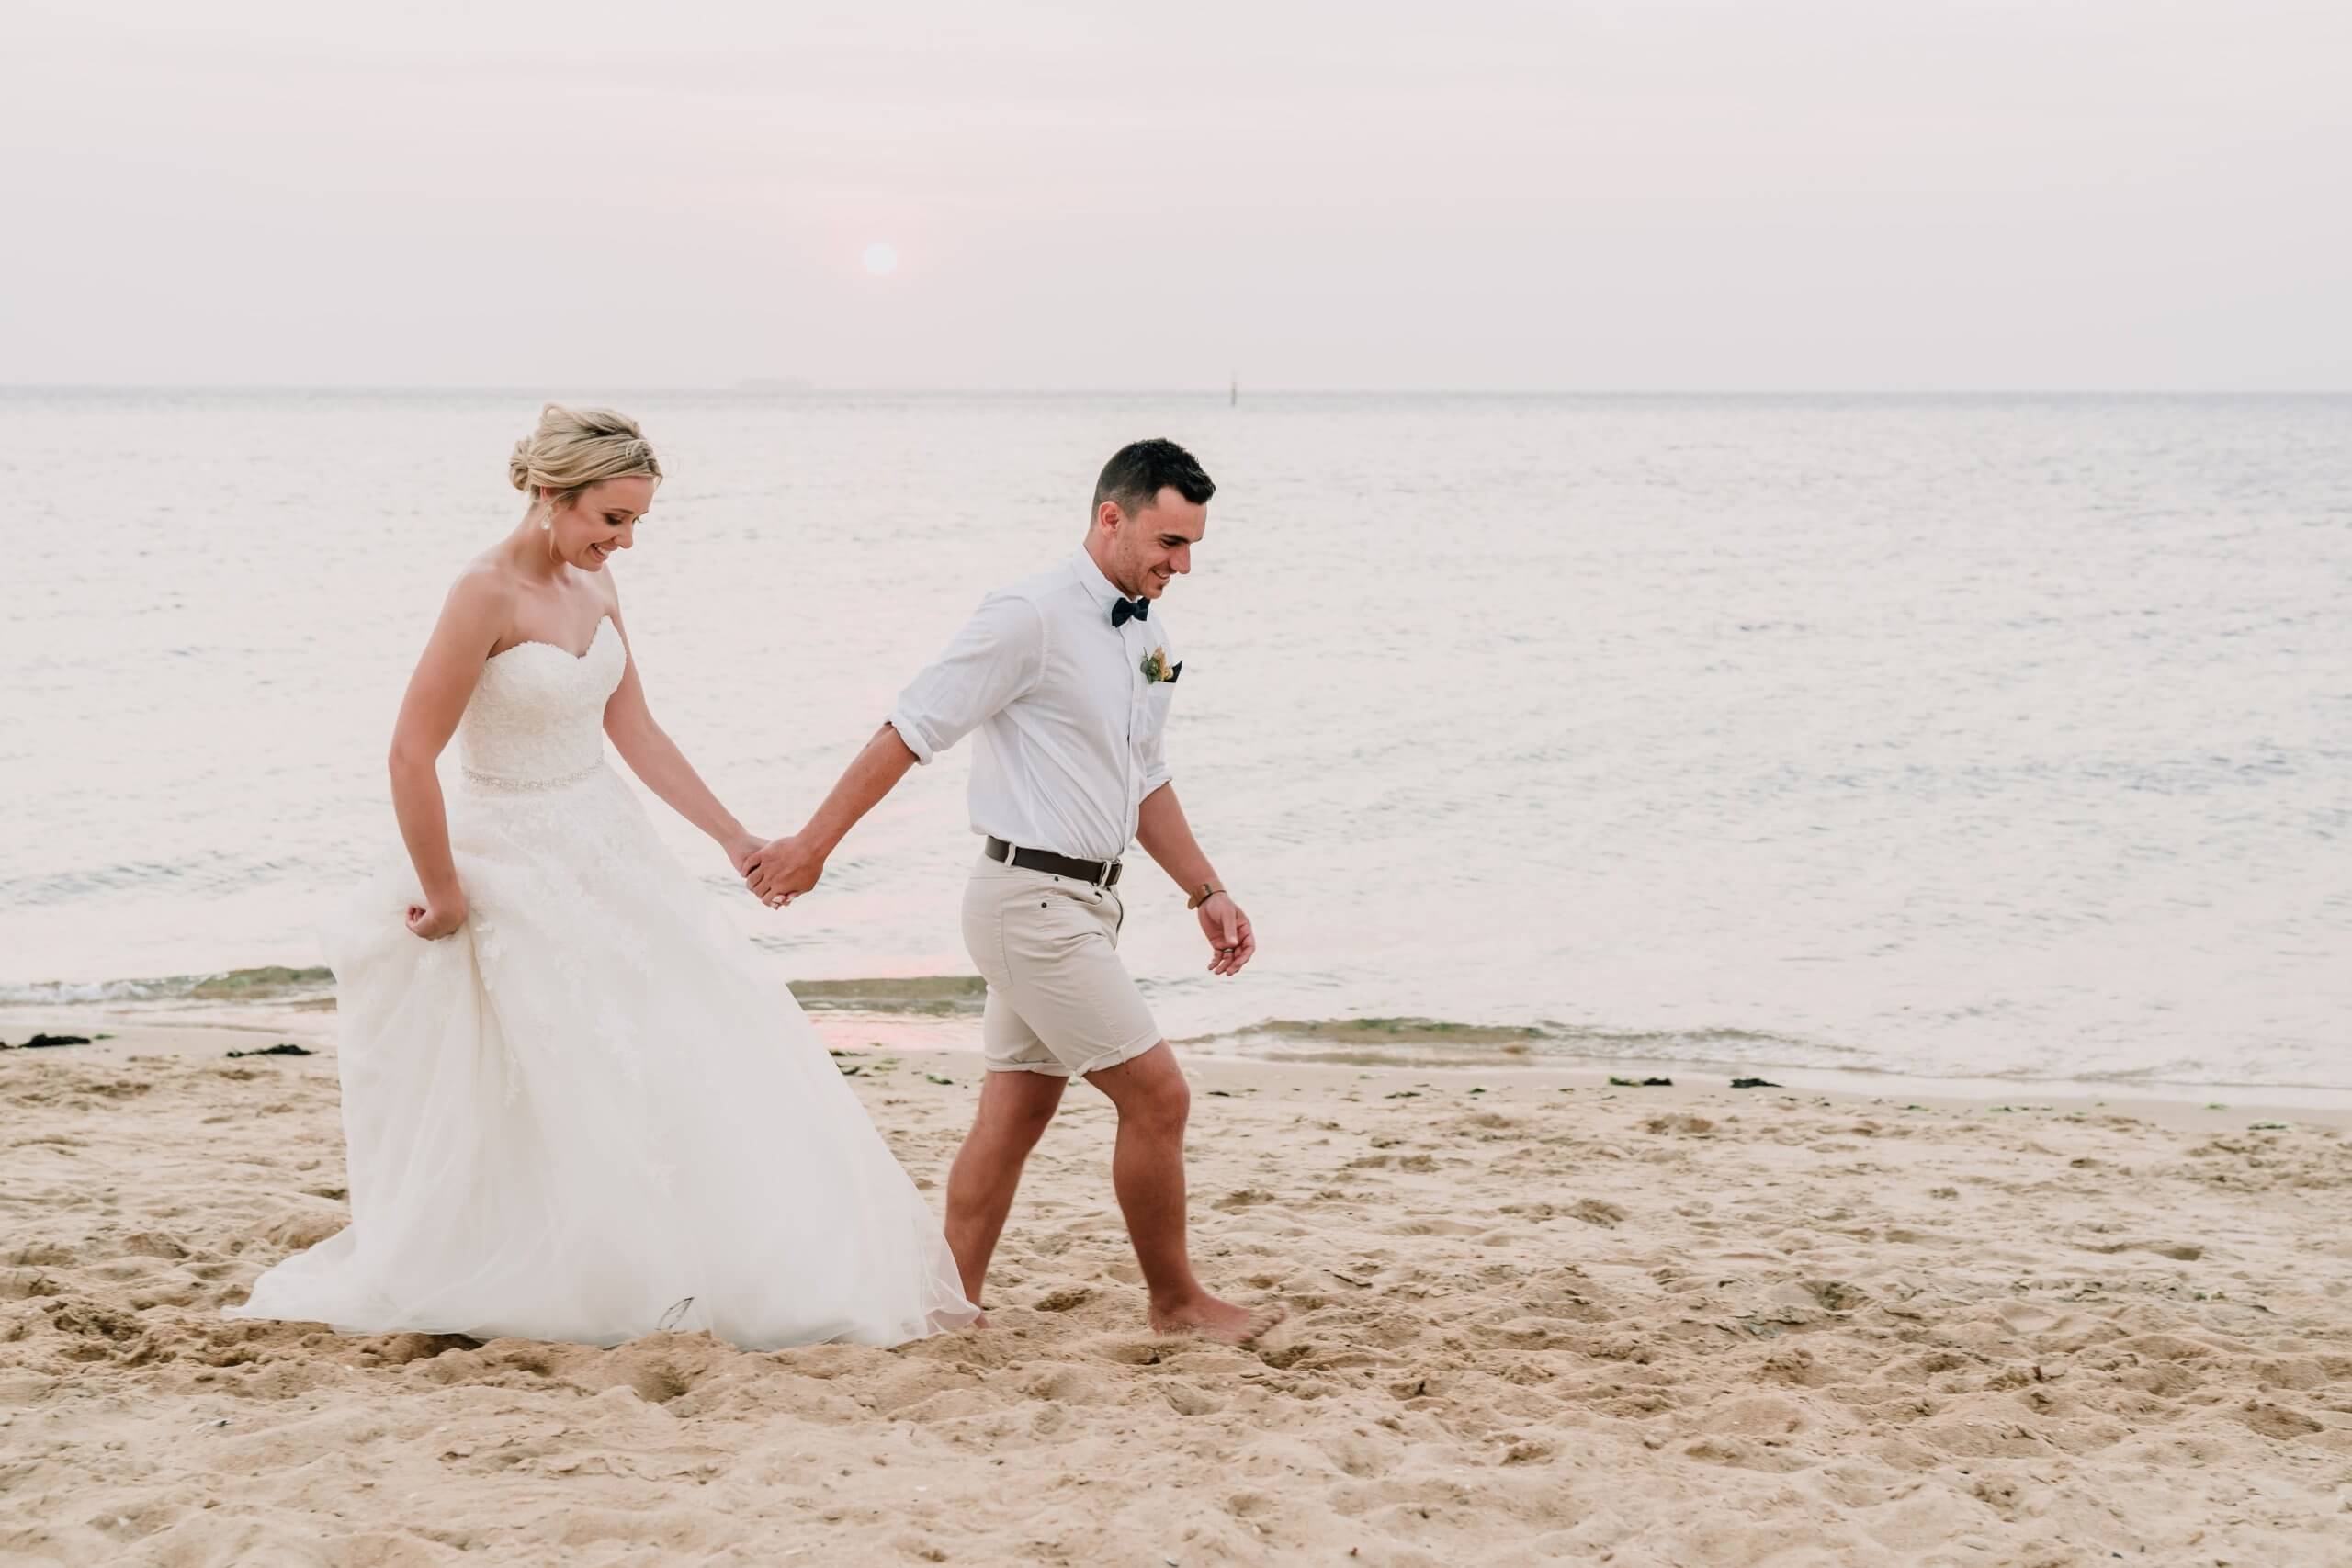 Bride and groom walking hand in hand in the shoreline with the calm sea and the pinkish horizon as the background.